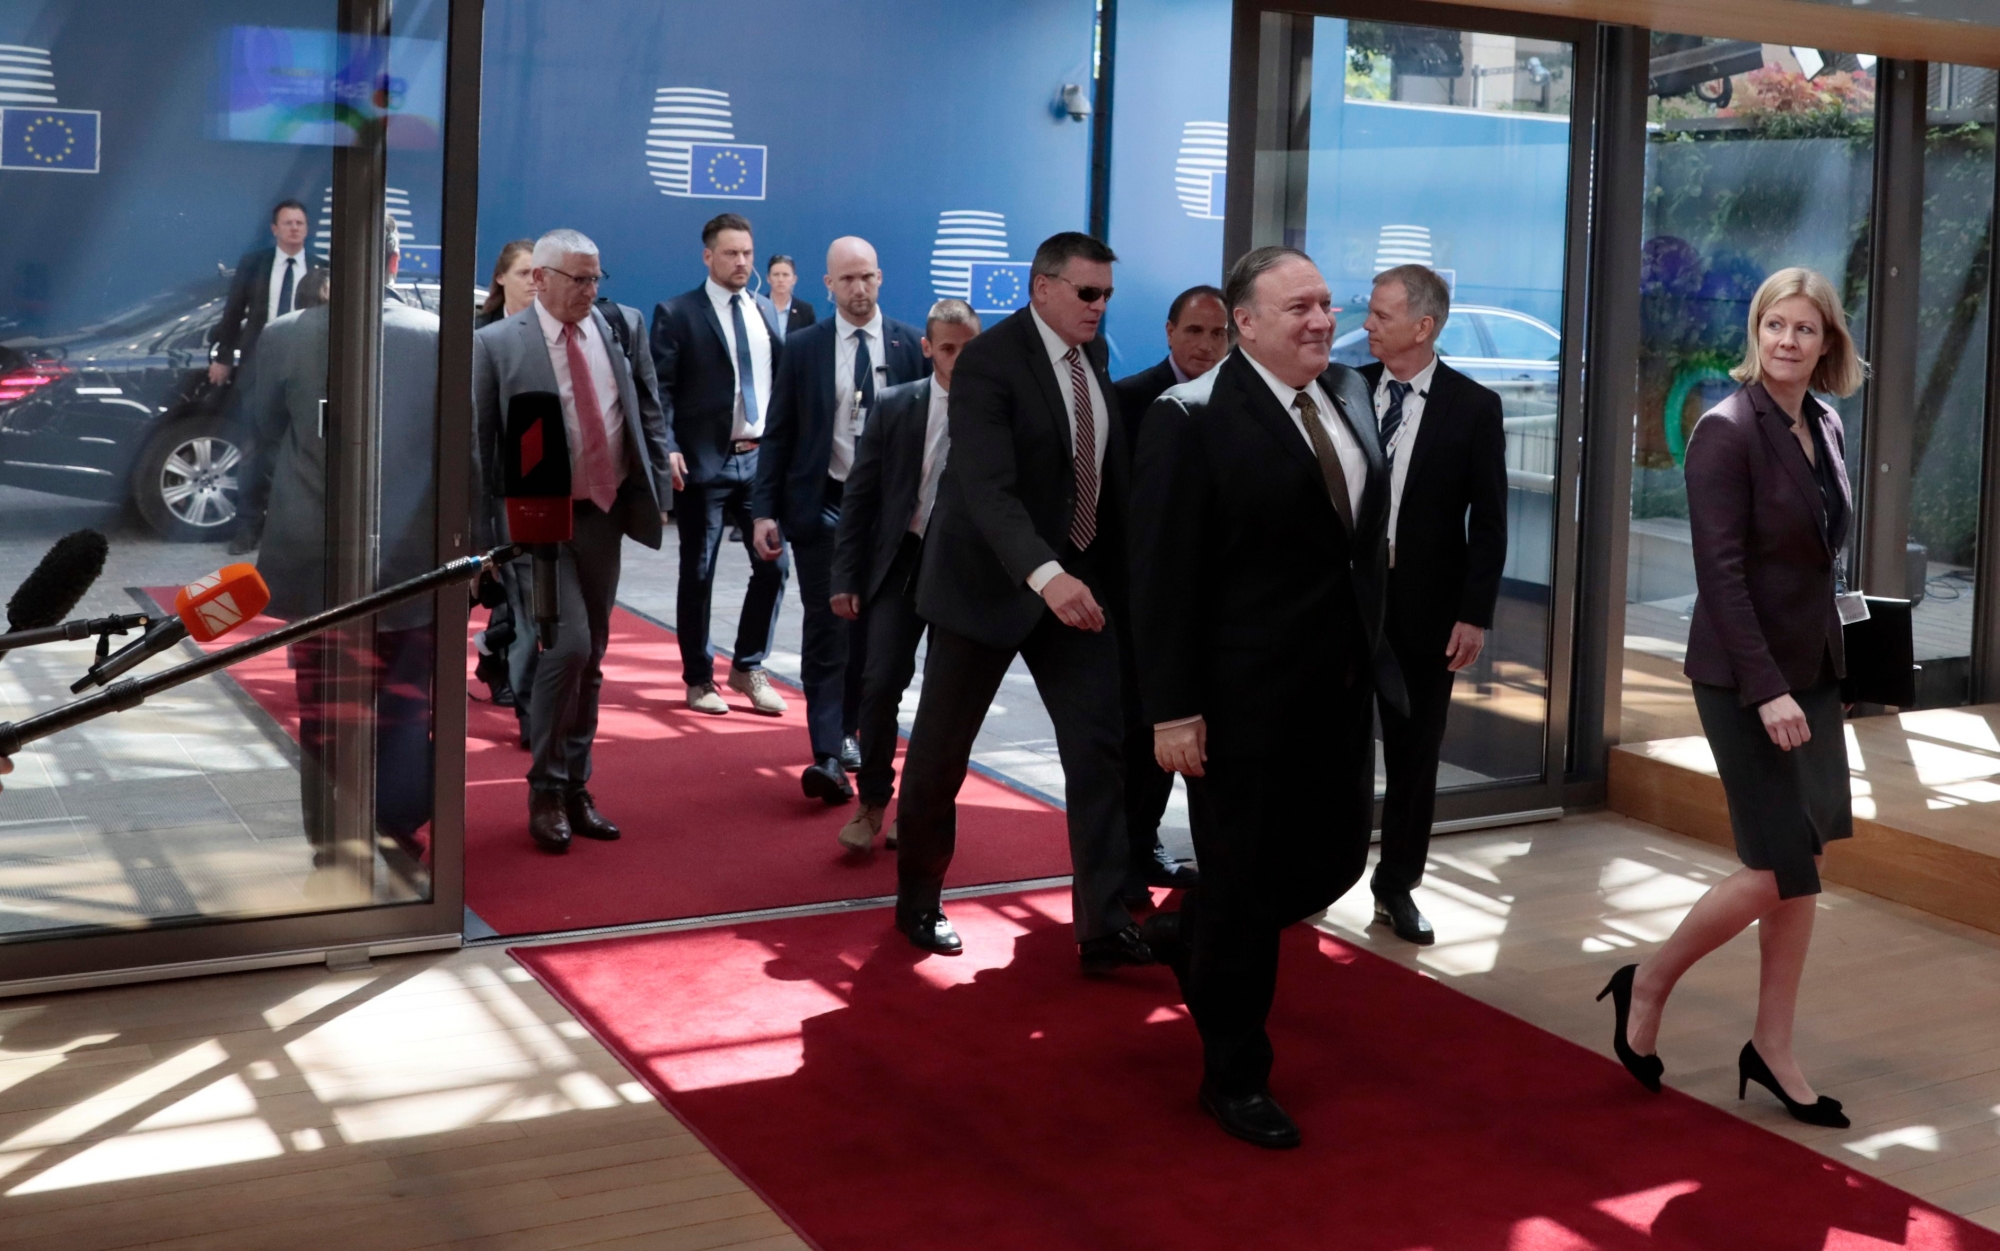 U.S. Secretary of State Mike Pompeo, center, arrives for a meeting with European foreign ministers at the Europa building in Brussels, Monday, May 13, 2019. The EU backers of the Iran nuclear deal meet with U.S. Secretary of State Mike Pompeo to discuss ways to keep the pact afloat. (AP Photo/Virginia Mayo) Belgium EU Iran